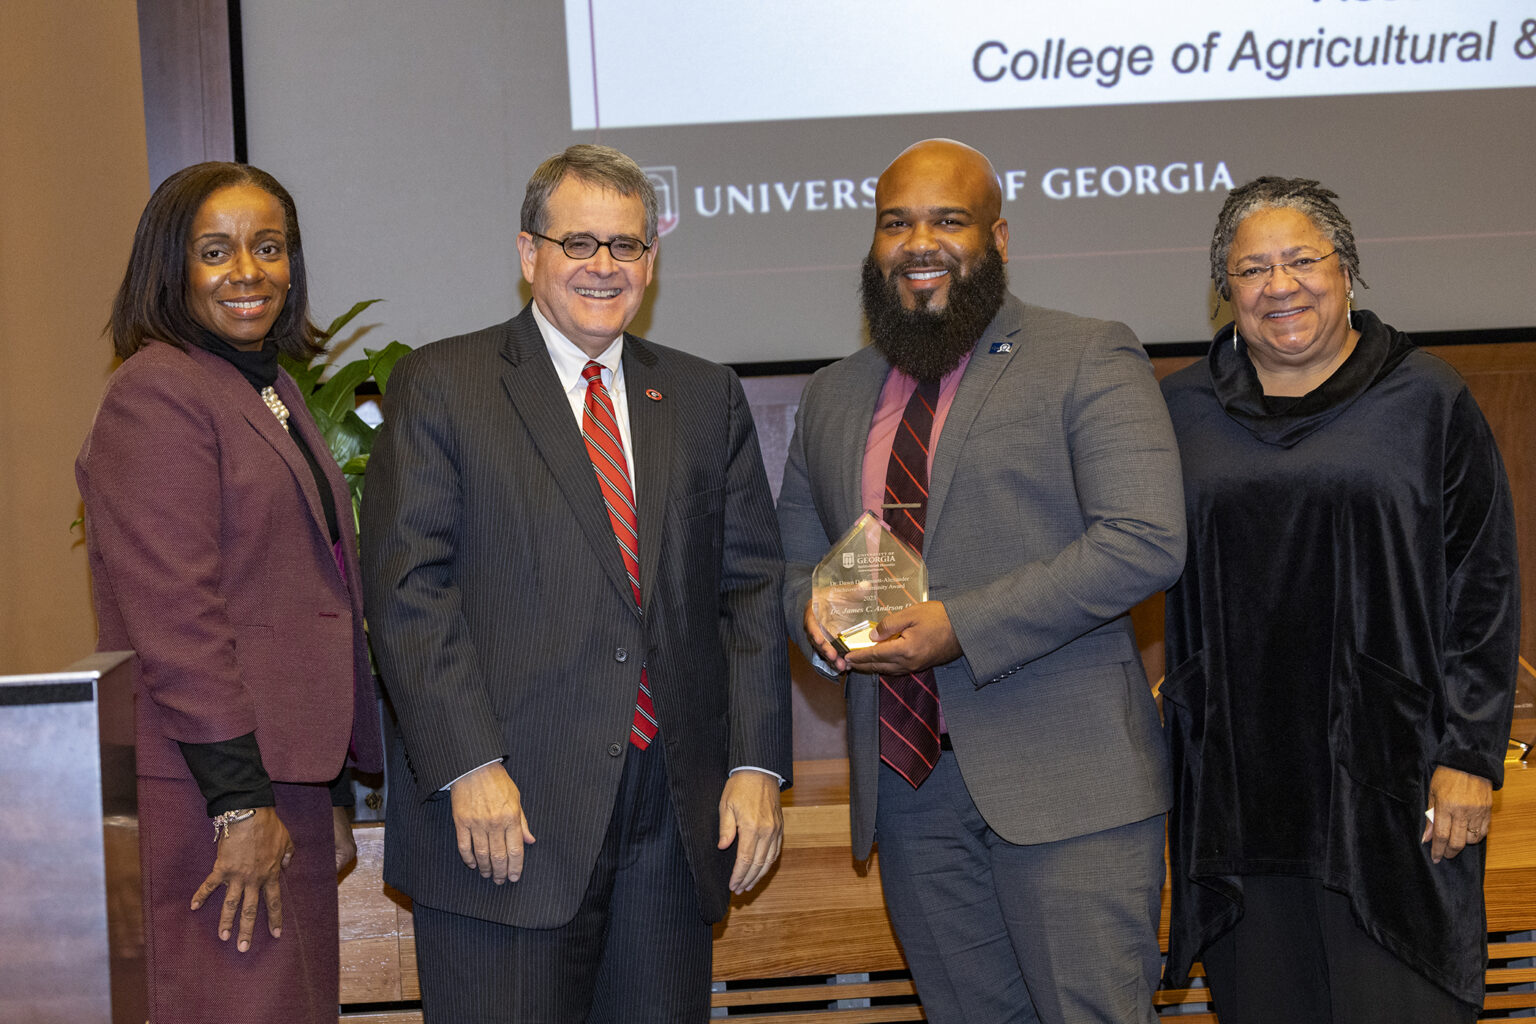 Shown, from left, are Michelle Cook, senior vice provost for diversity and inclusion and strategic university initiatives; UGA President Jere W. Morehead; James Anderson II, recipient of the second annual Dawn D. Bennett-Alexander Award; and Dawn Bennett-Alexander. (Photo by Dorothy Kozlowski/UGA)